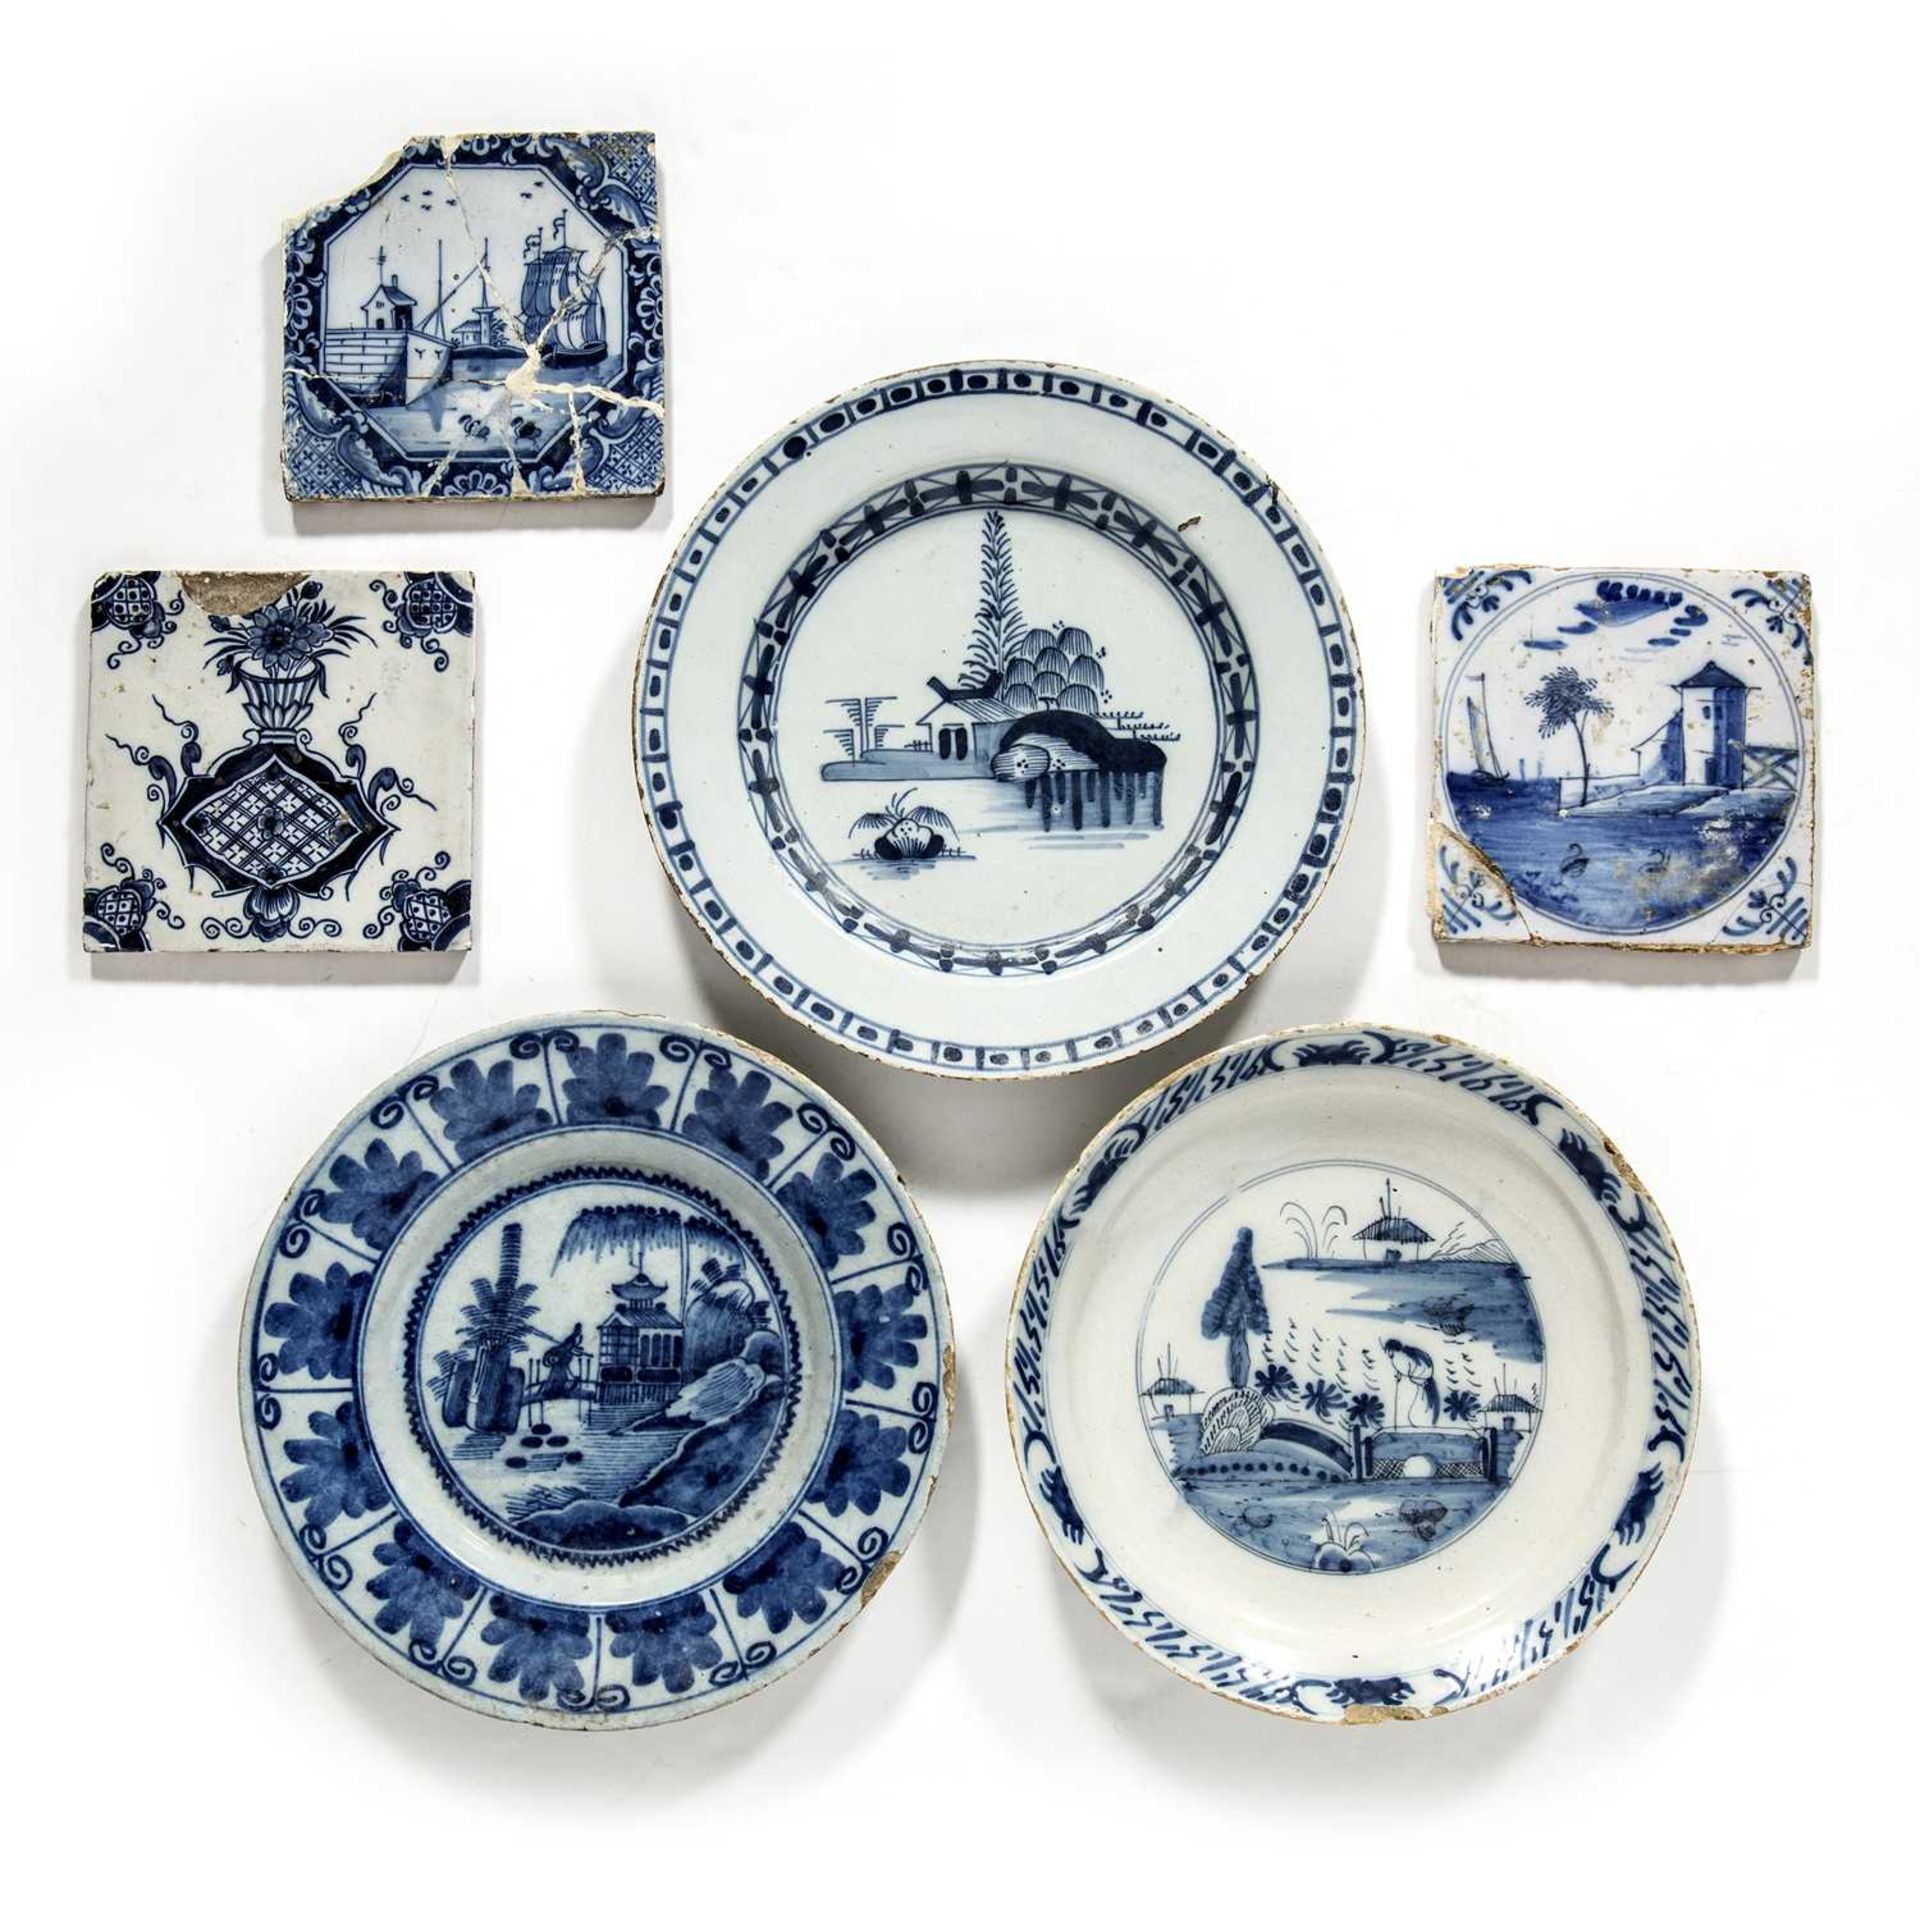 Collection of Delftware consisting of Three Delftware plates, all unmarked with varying